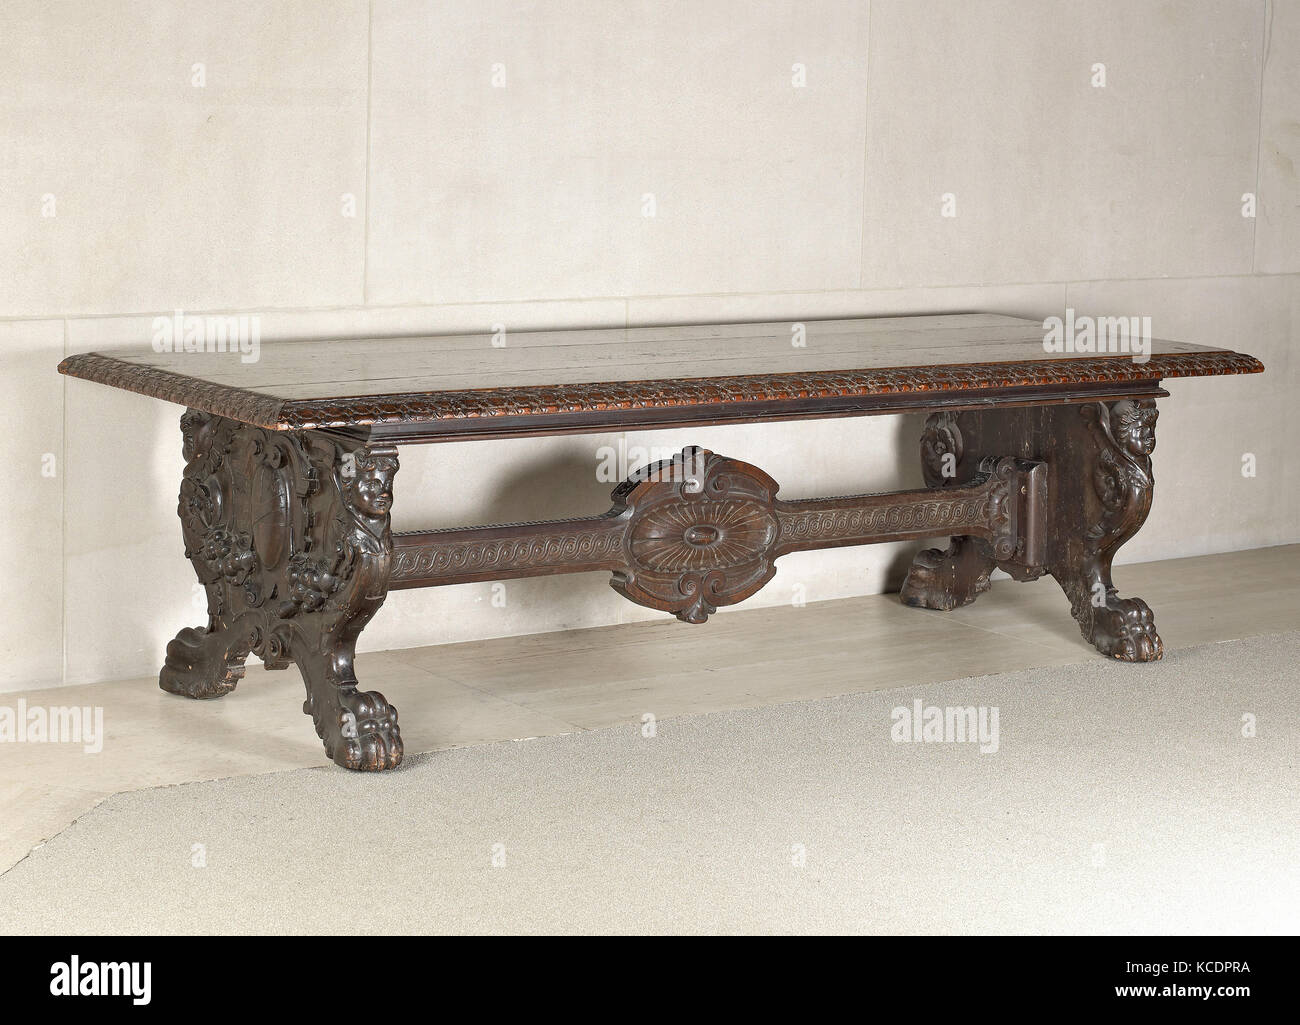 Center table, 19th century, second half or early 20th century Stock Photo